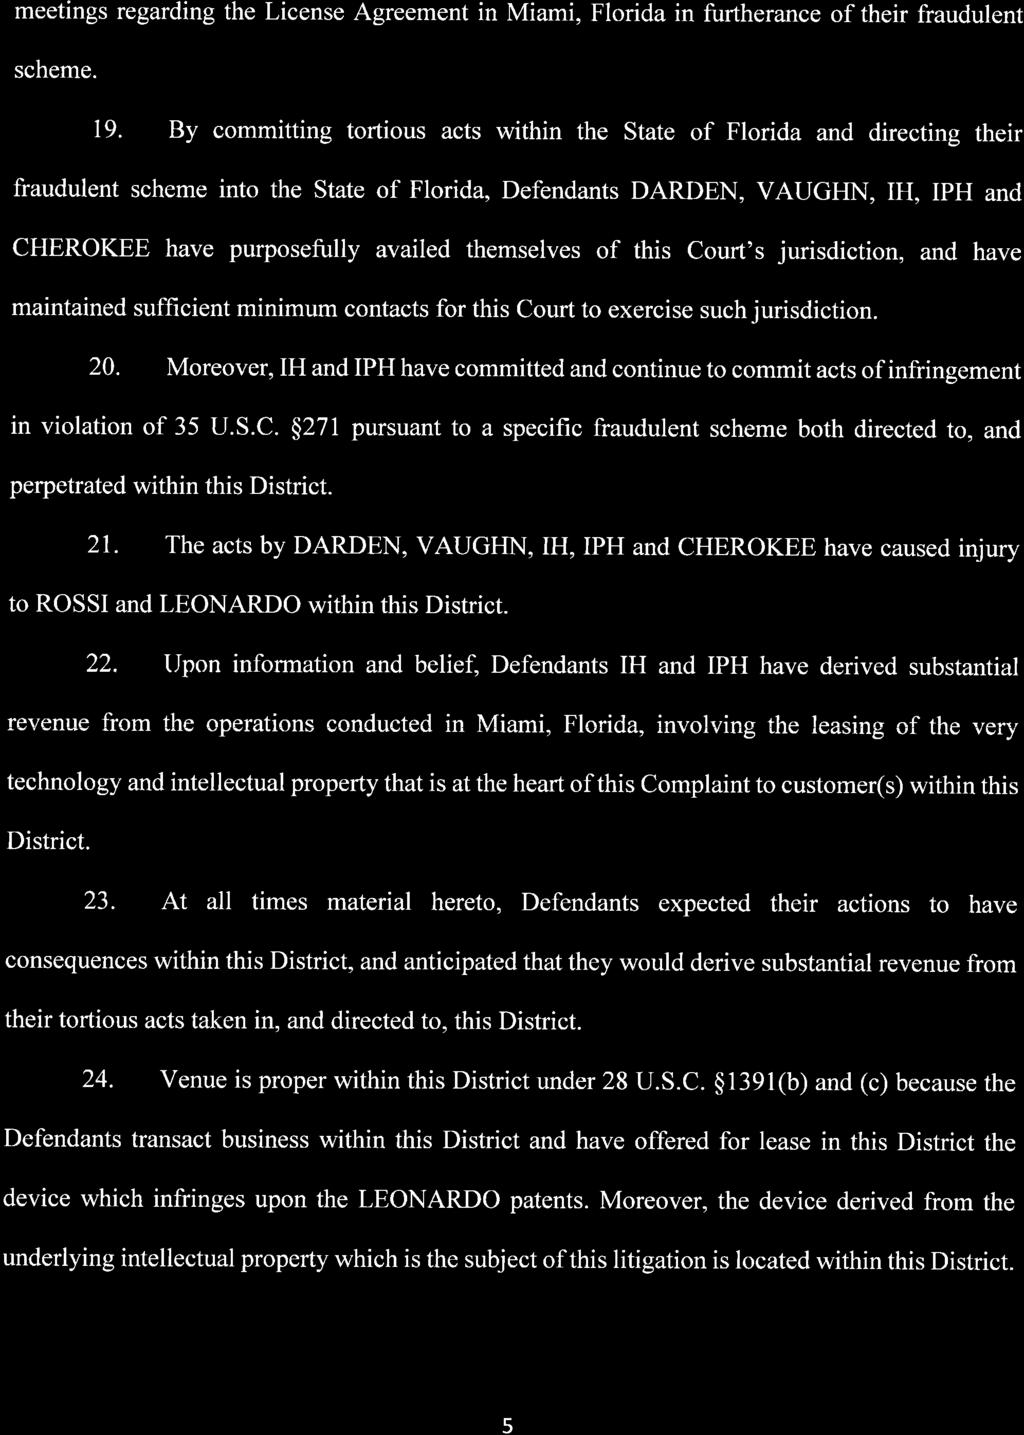 Case 1:16-cv-21199-CMA Document 1 Entered on FLSD Docket 04/05/2016 Page 5 of 27 meetings regarding the License Agreement in Miami, Florida in furtherance of their fraudulent scheme. 19.